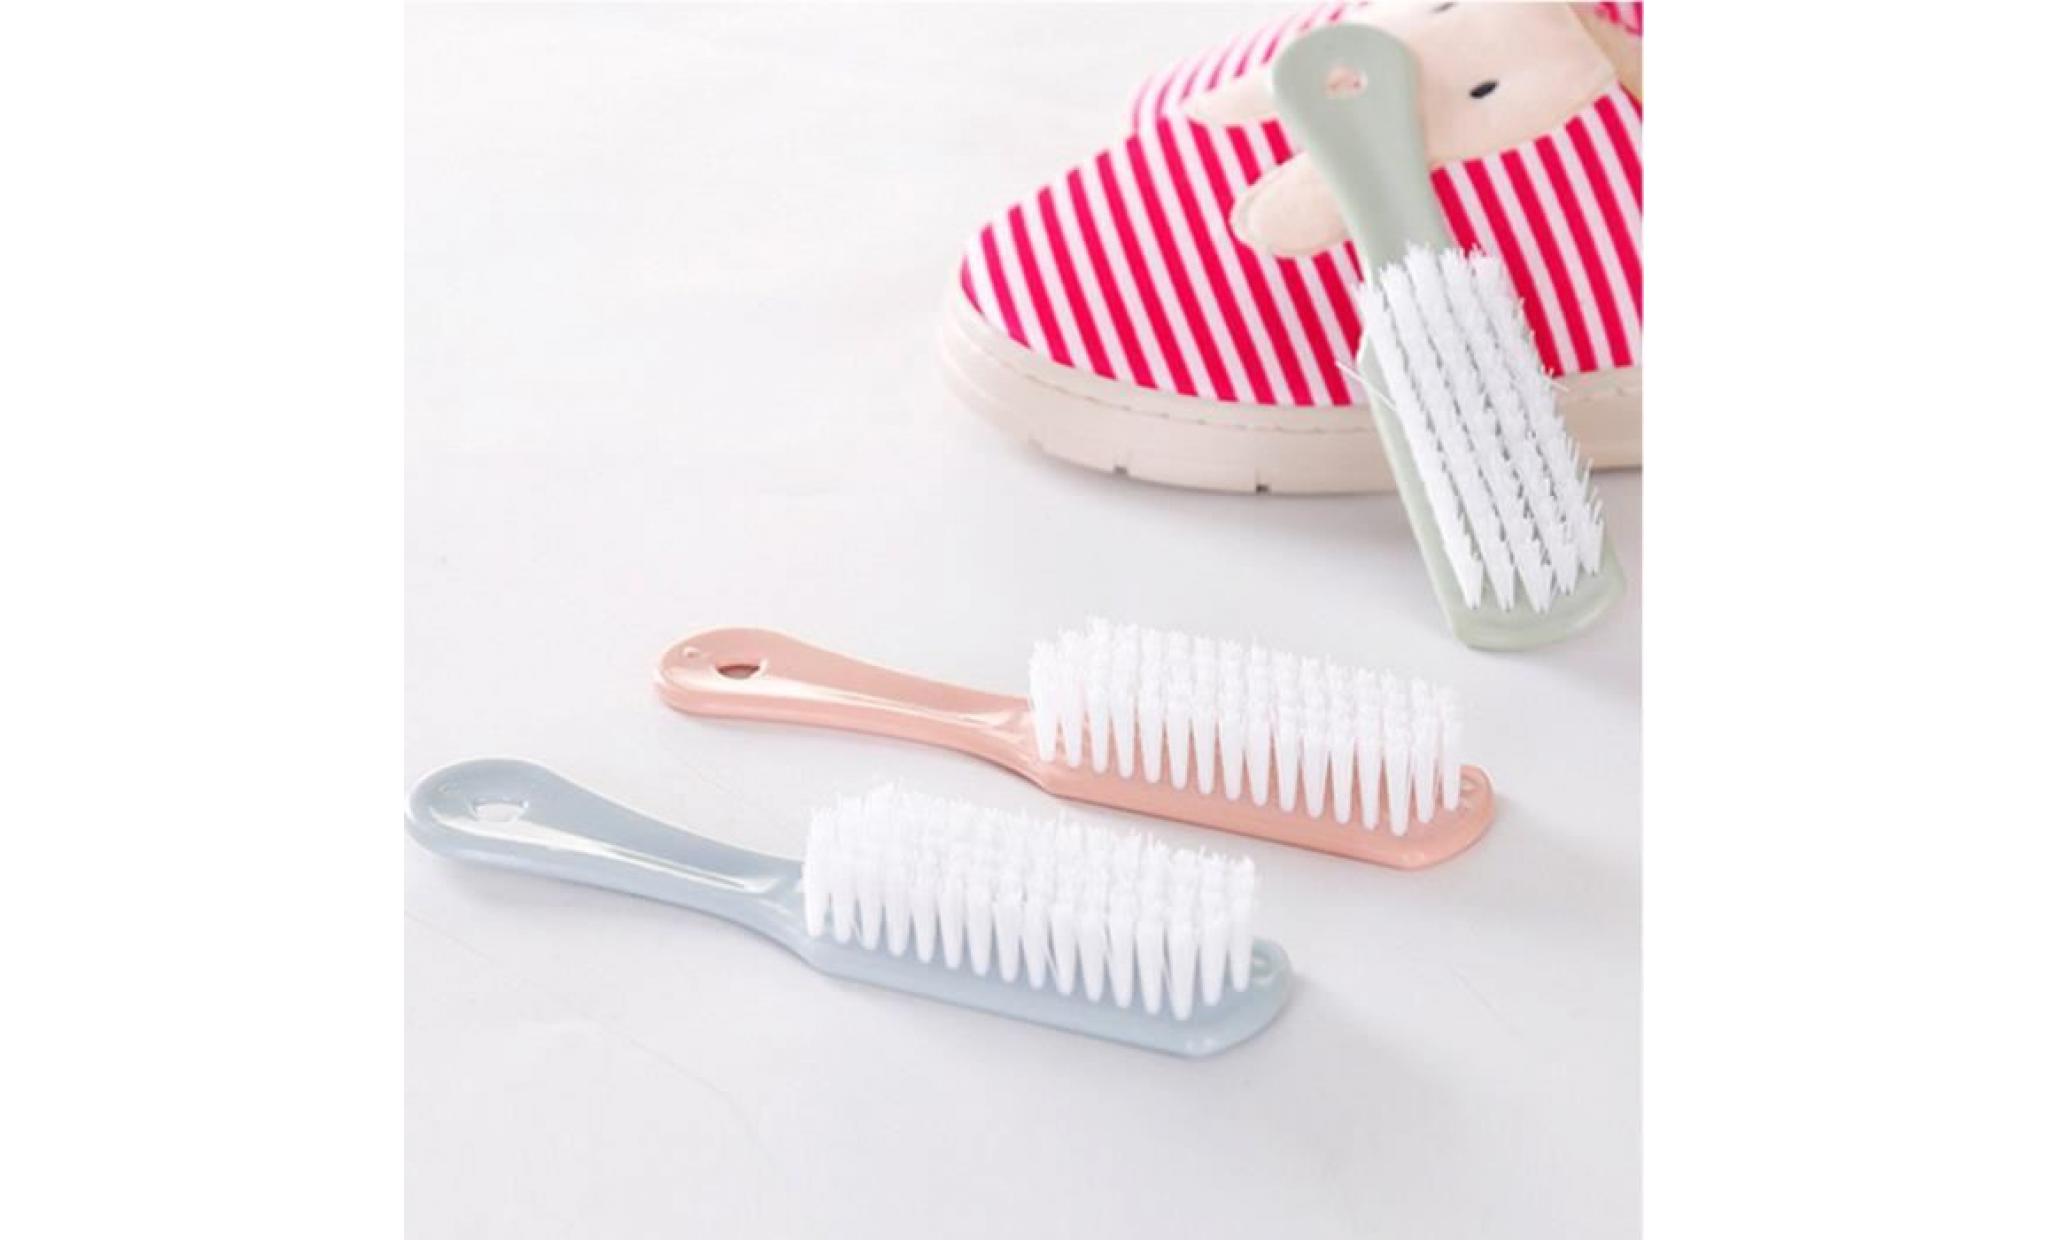 lux70524452 cuisine wash lavage outil bol palm brosse chaussures scrubber cleaner nettoyage pas cher